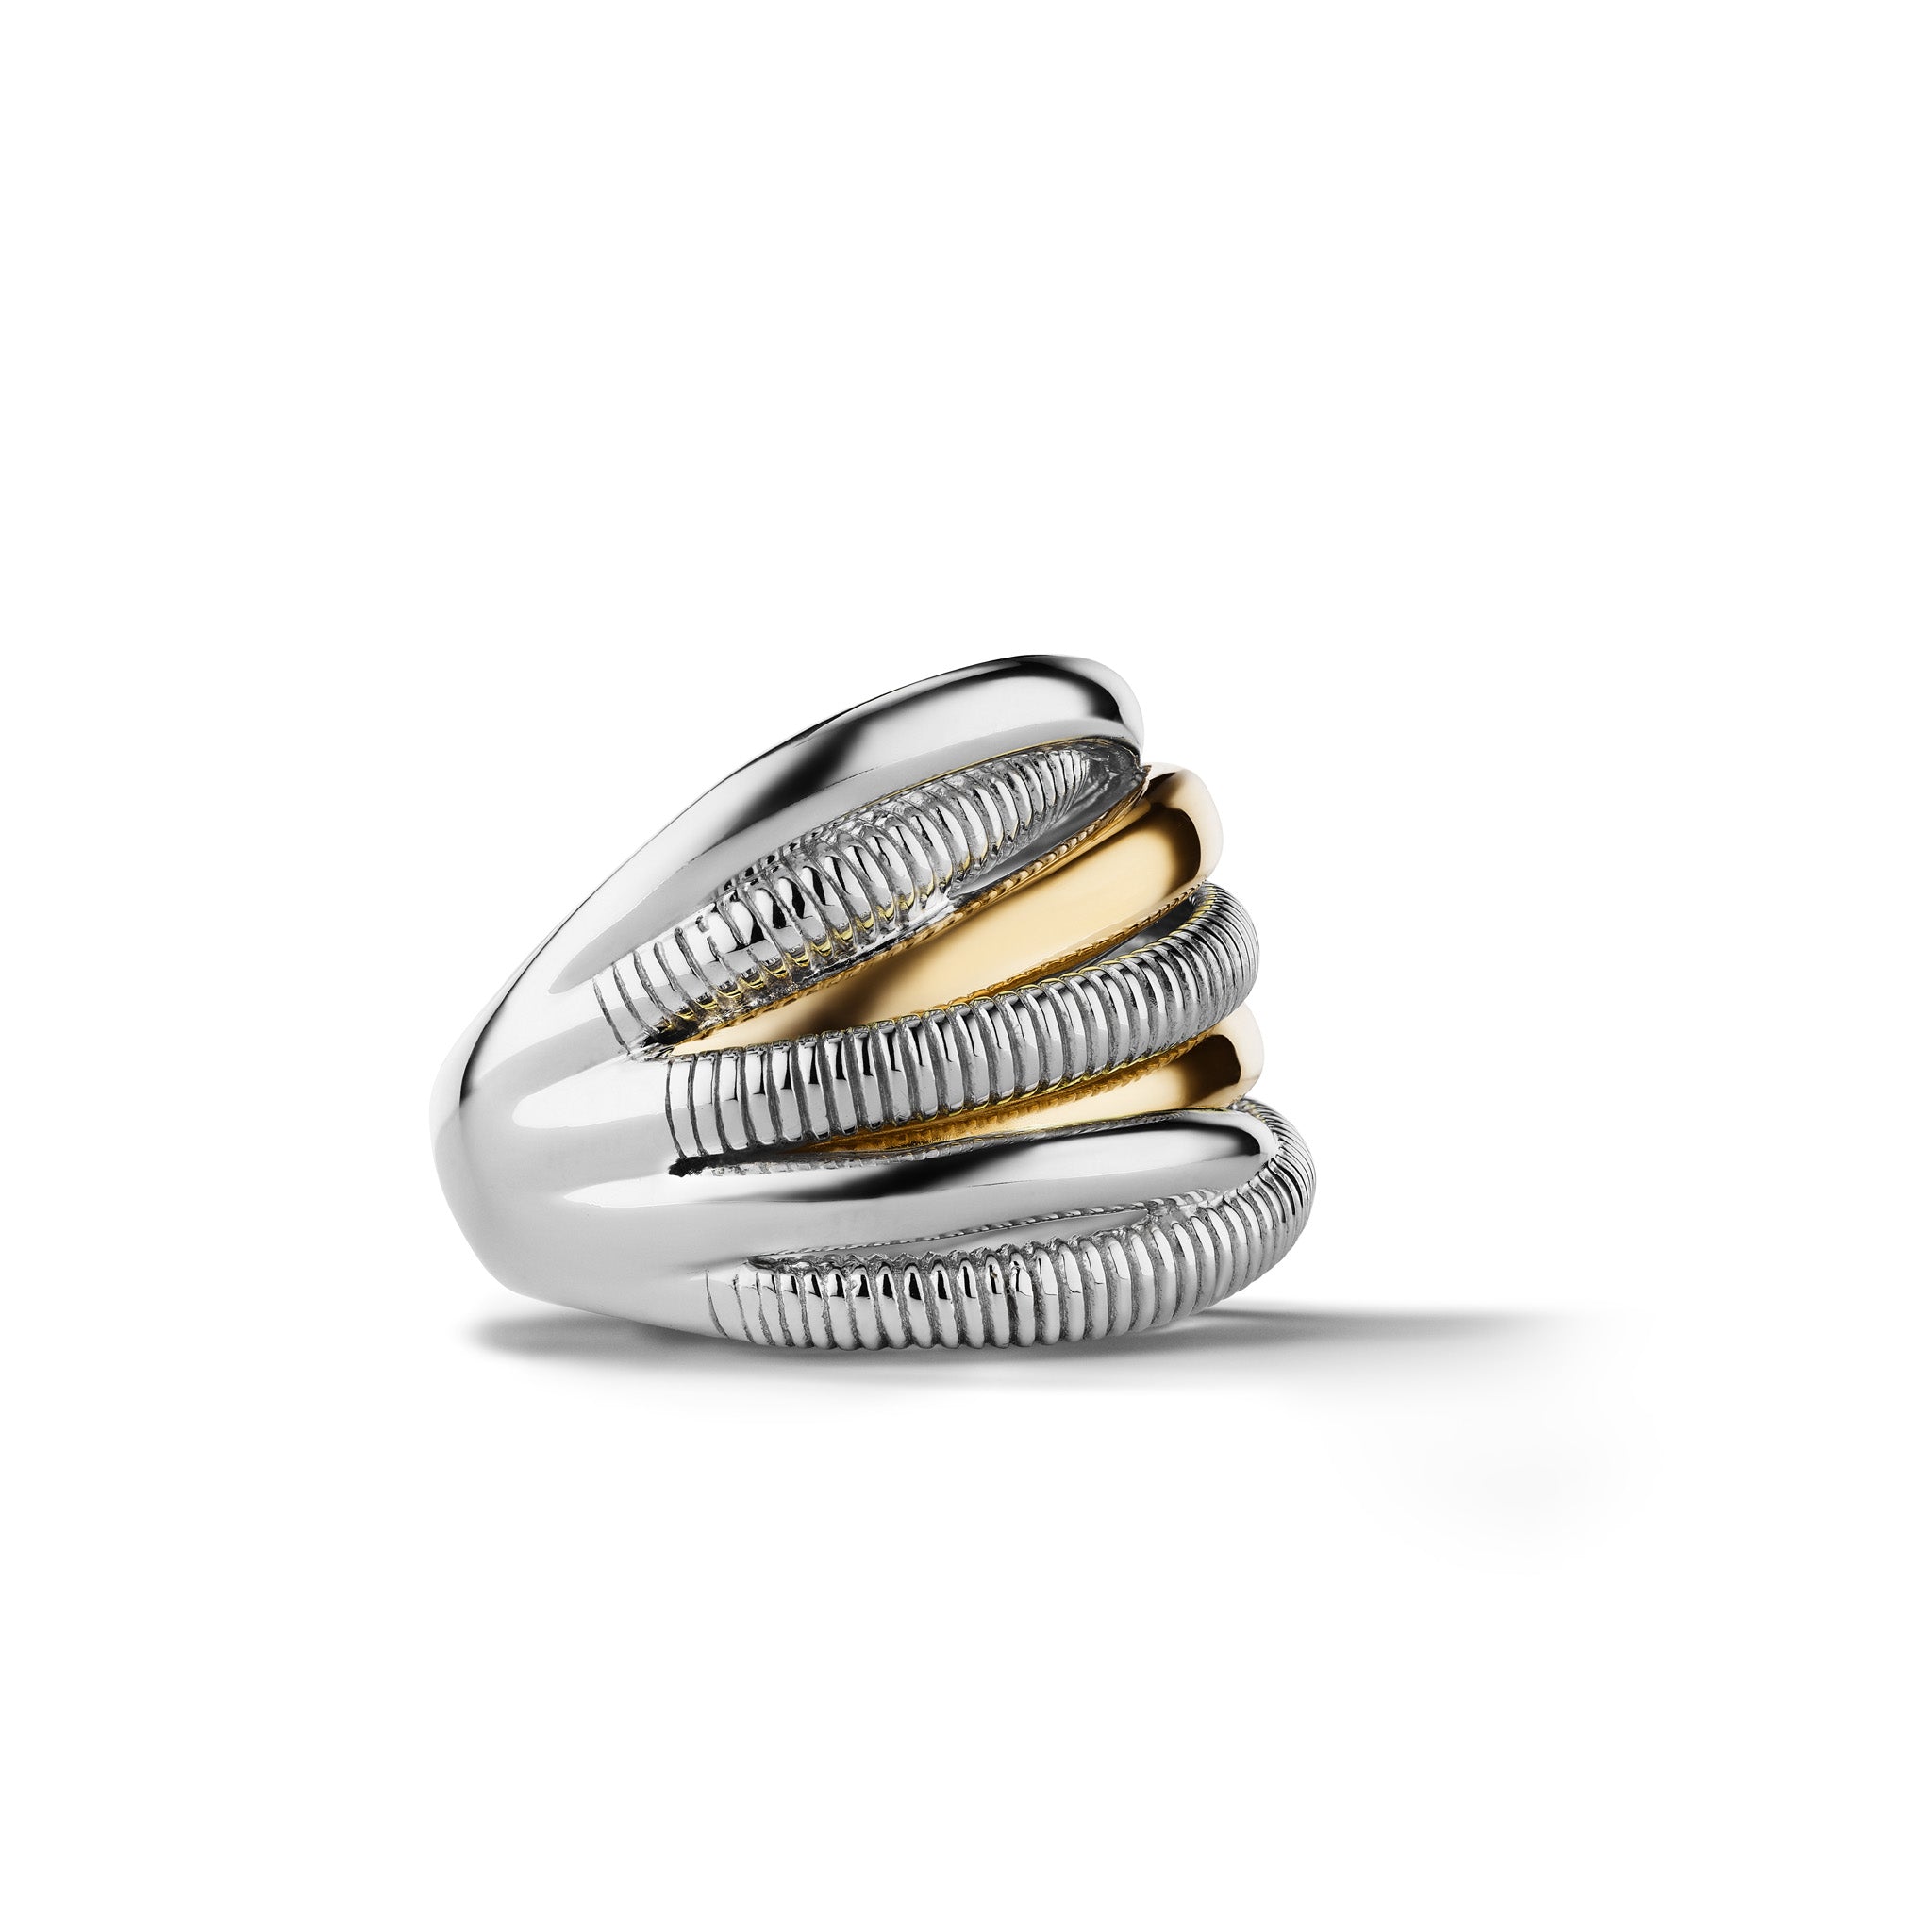 Eternity Seven Band Highway Ring with 18K Gold